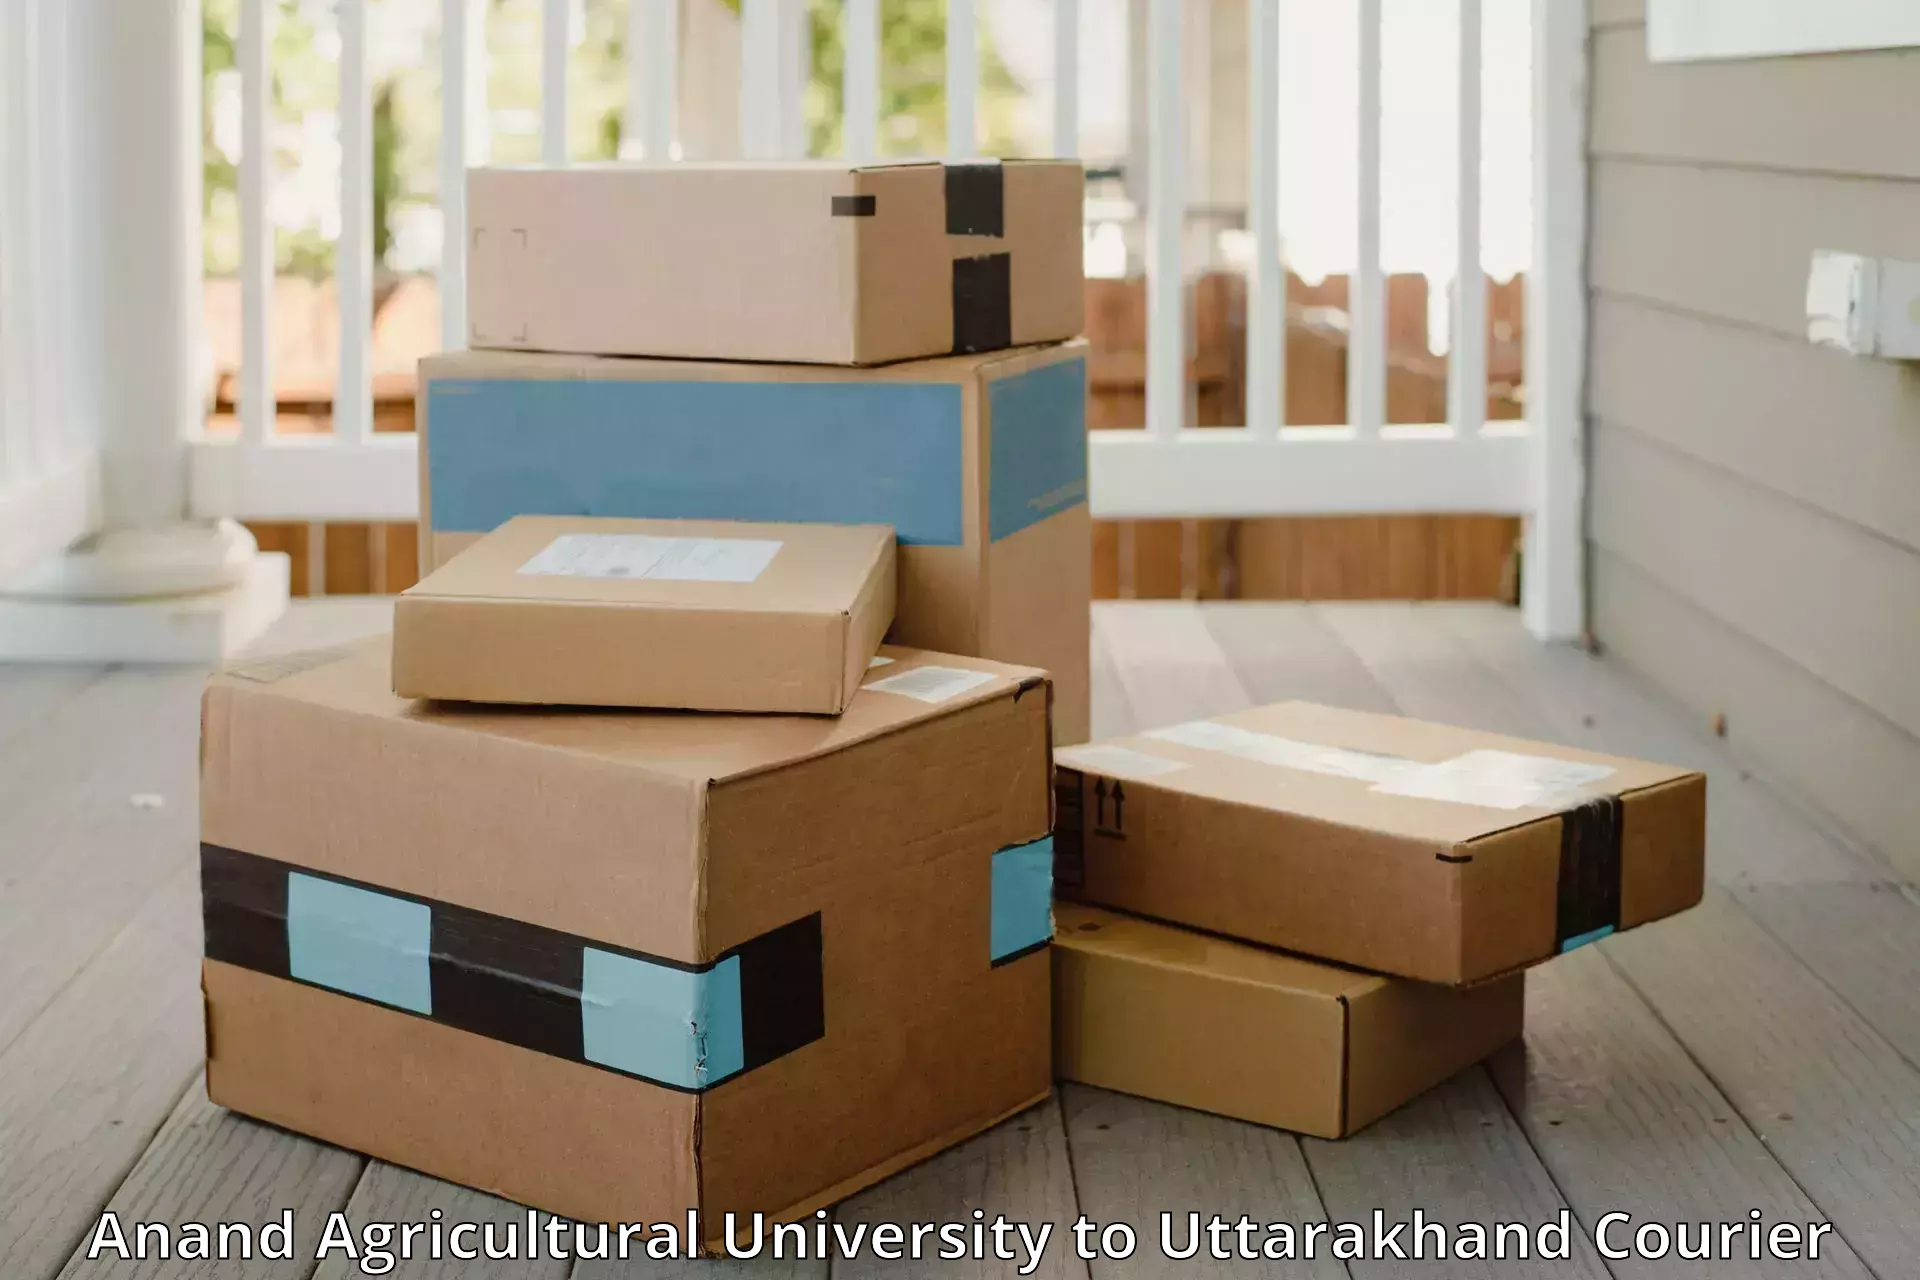 Baggage shipping service Anand Agricultural University to Tanakpur